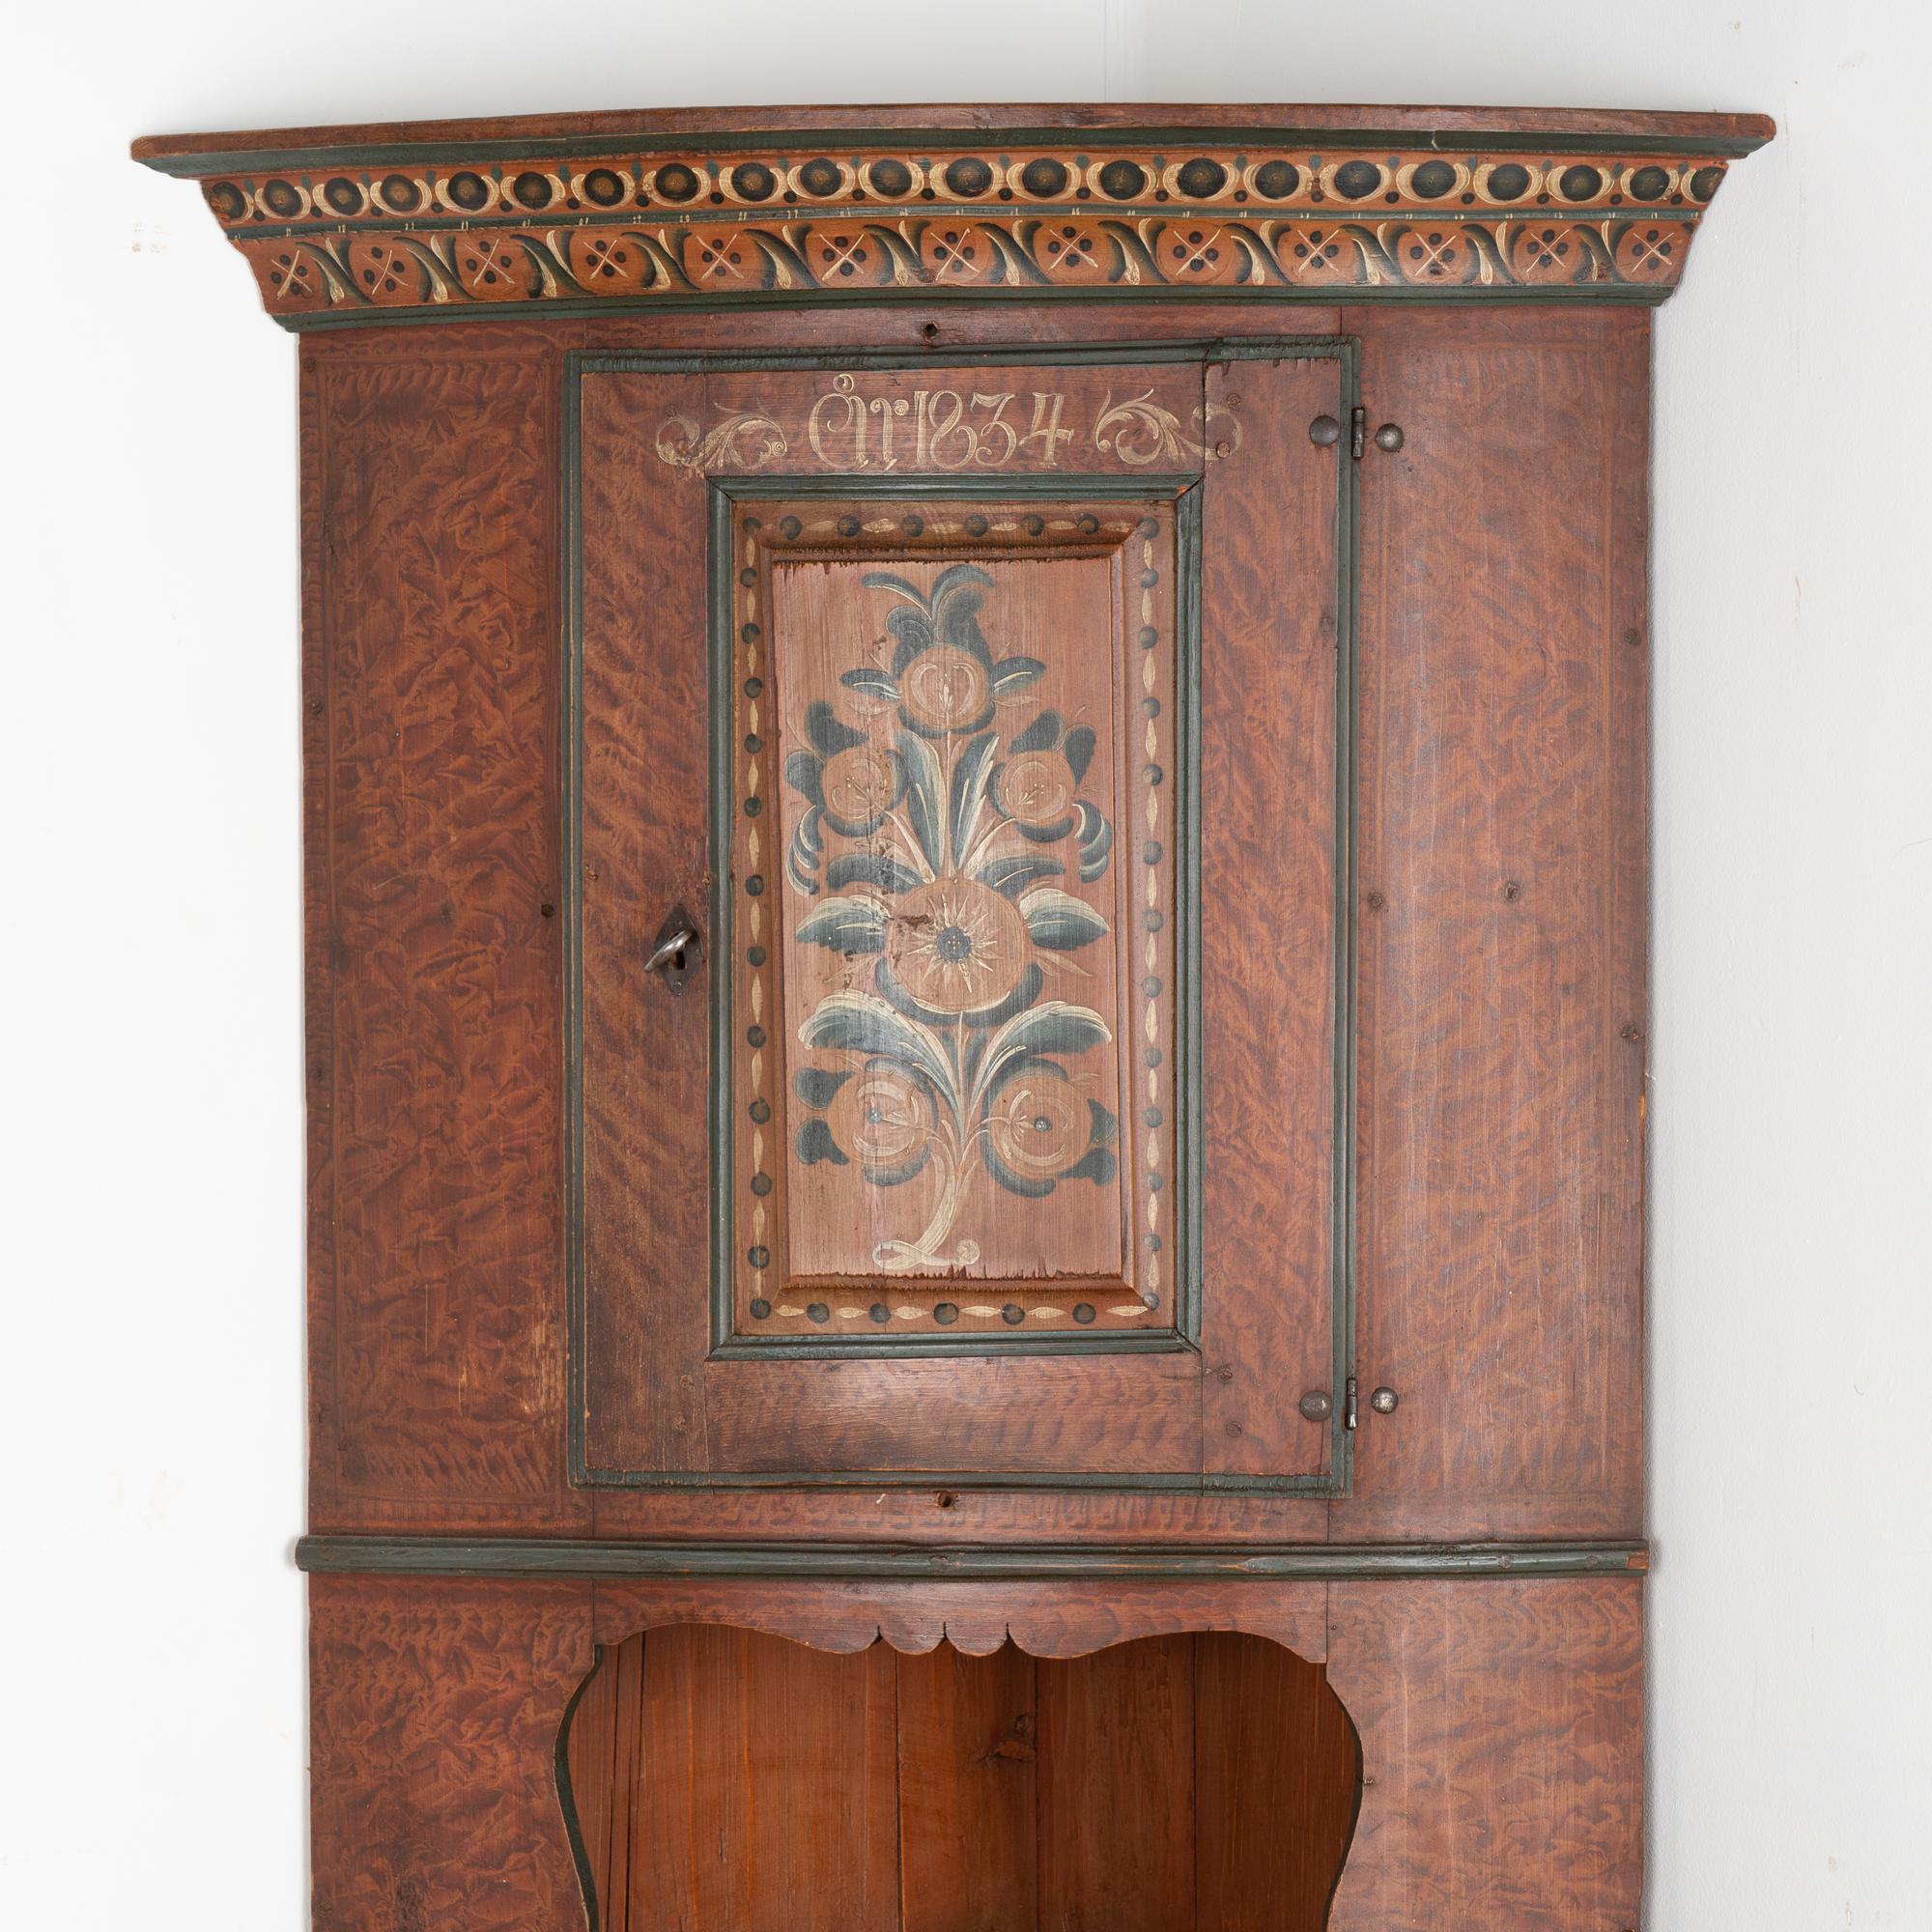 Original Painted Dalarna Corner Cabinet Cupboard, Sweden dated 1834 In Good Condition For Sale In Round Top, TX